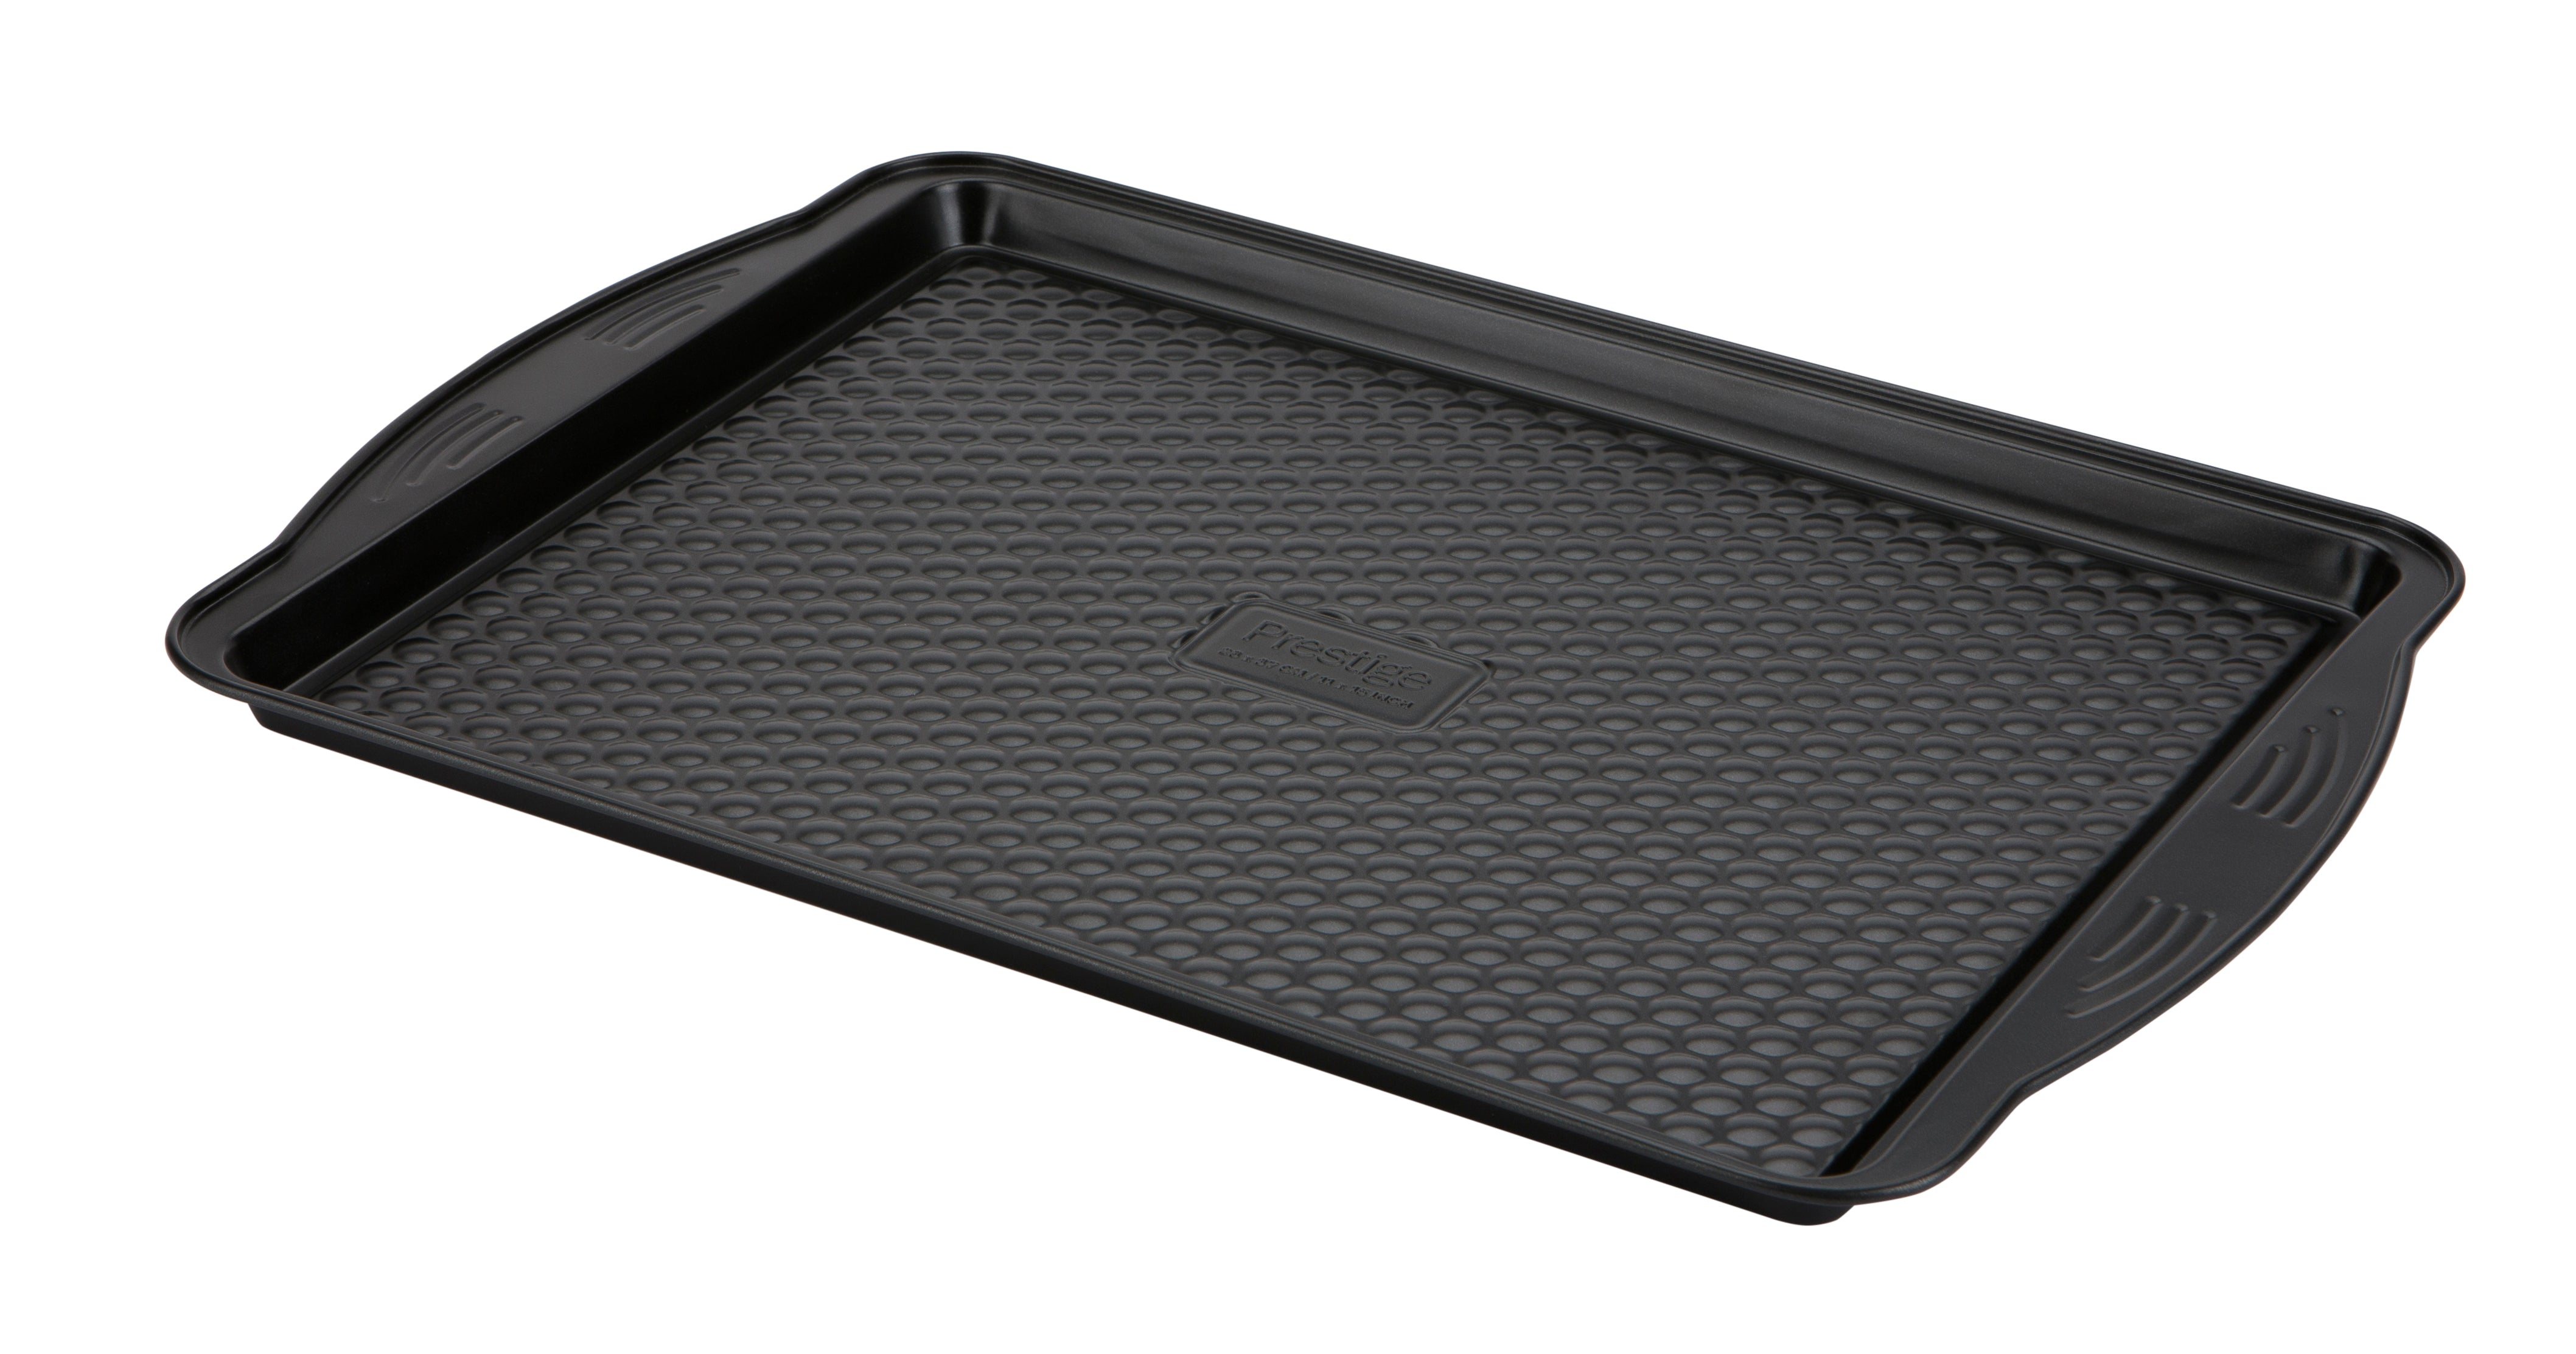 An image of Aerolift Large Oven Tray